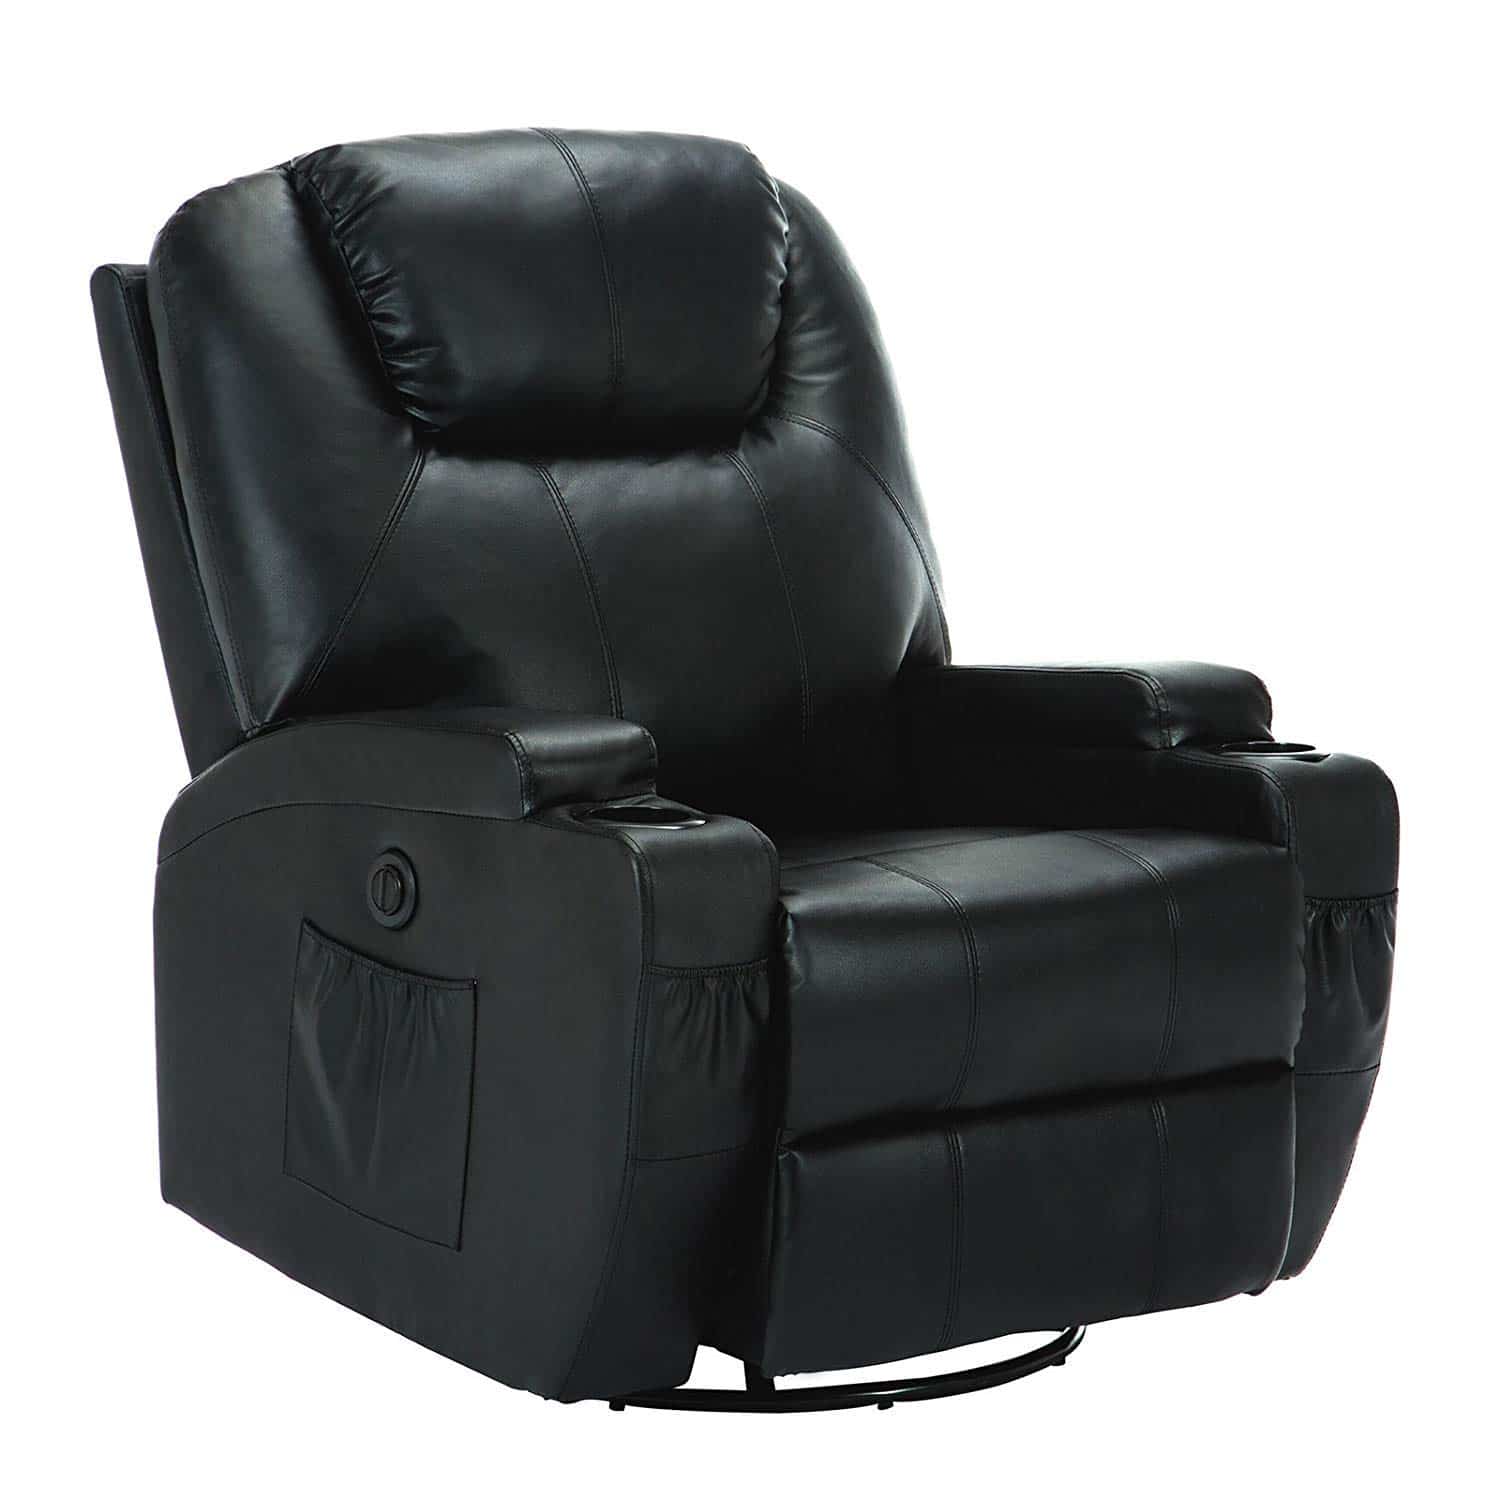 Mecor Electric Massage Recliner Chair